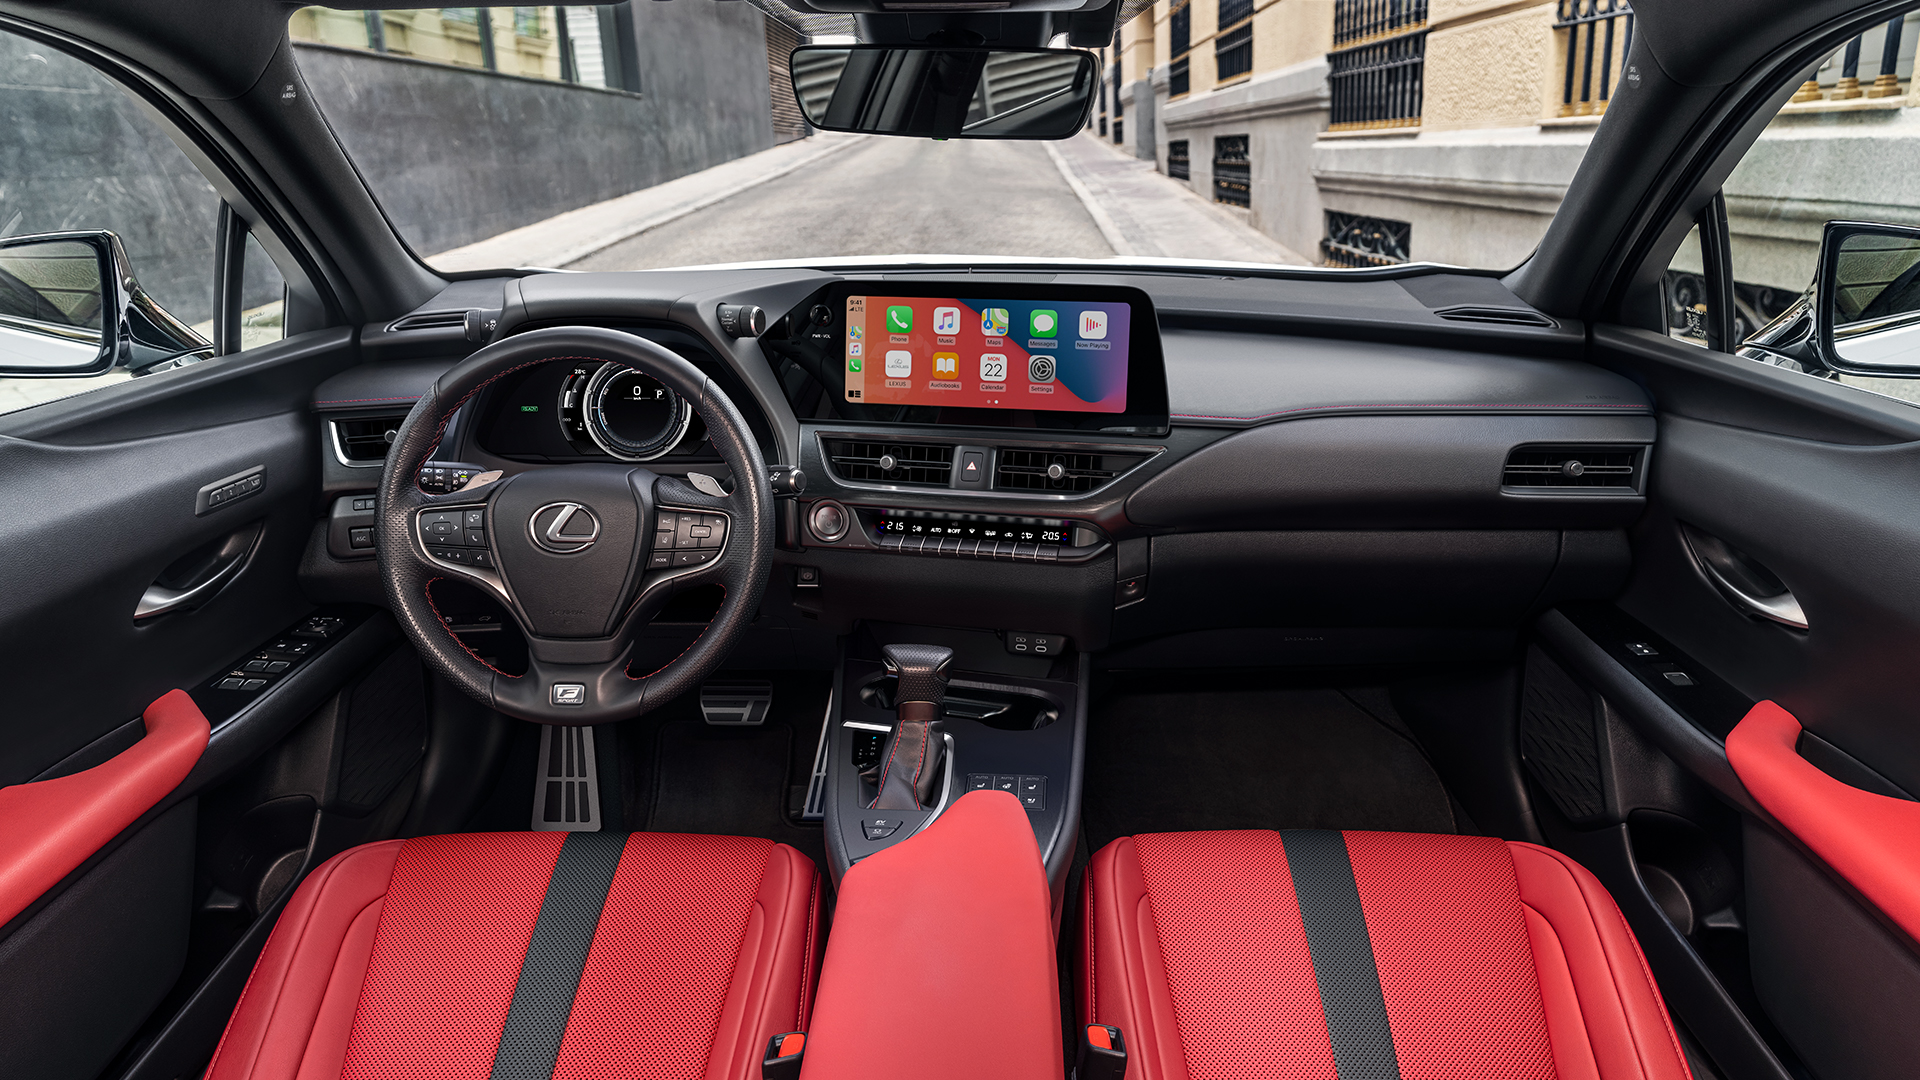 The front interior of the Lexus UX